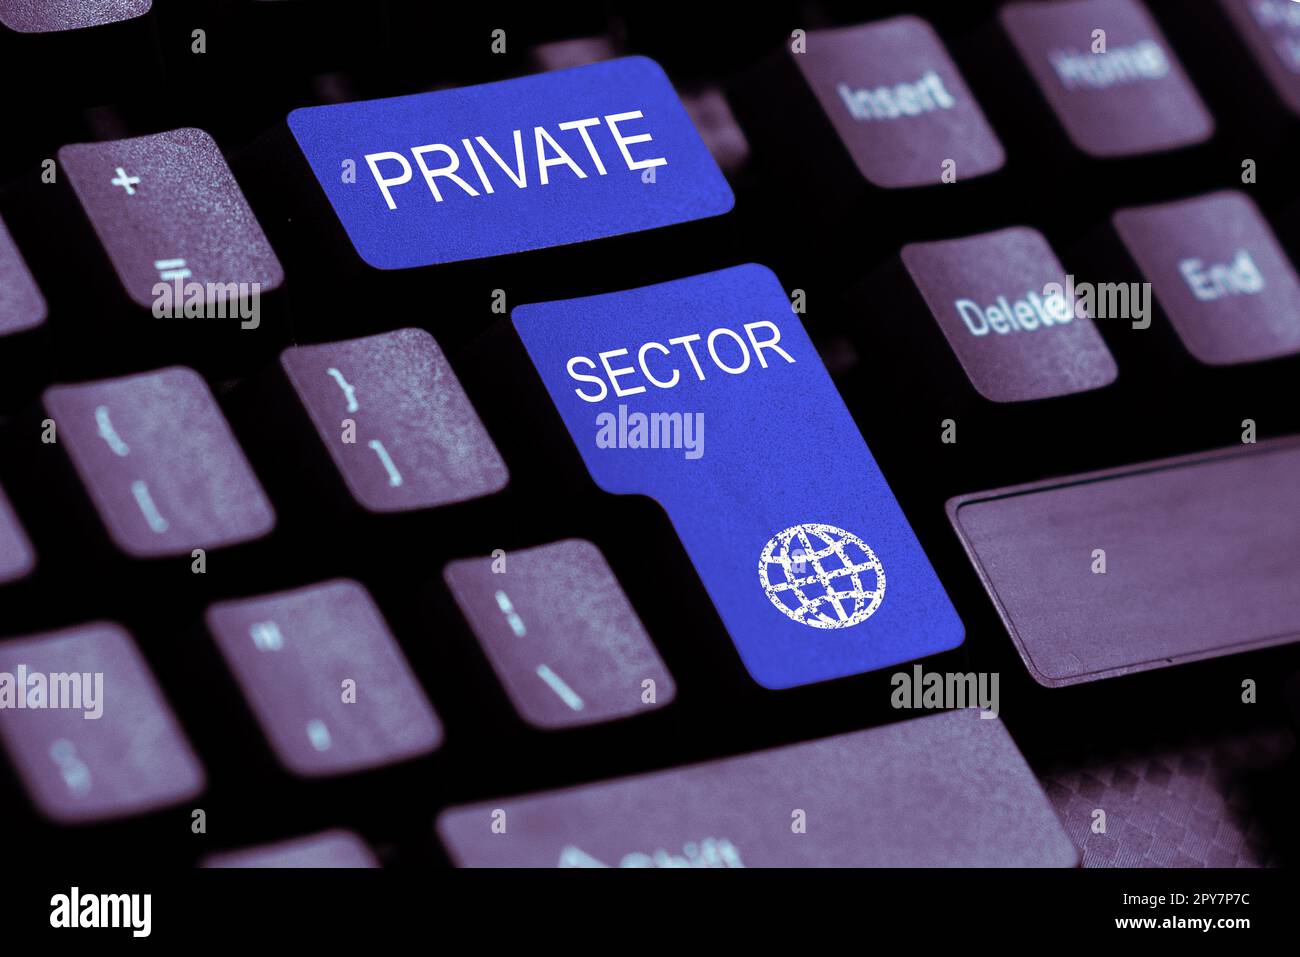 Hand writing sign Private Sector. Word Written on a part of an economy which is not controlled or owned by the government Stock Photo